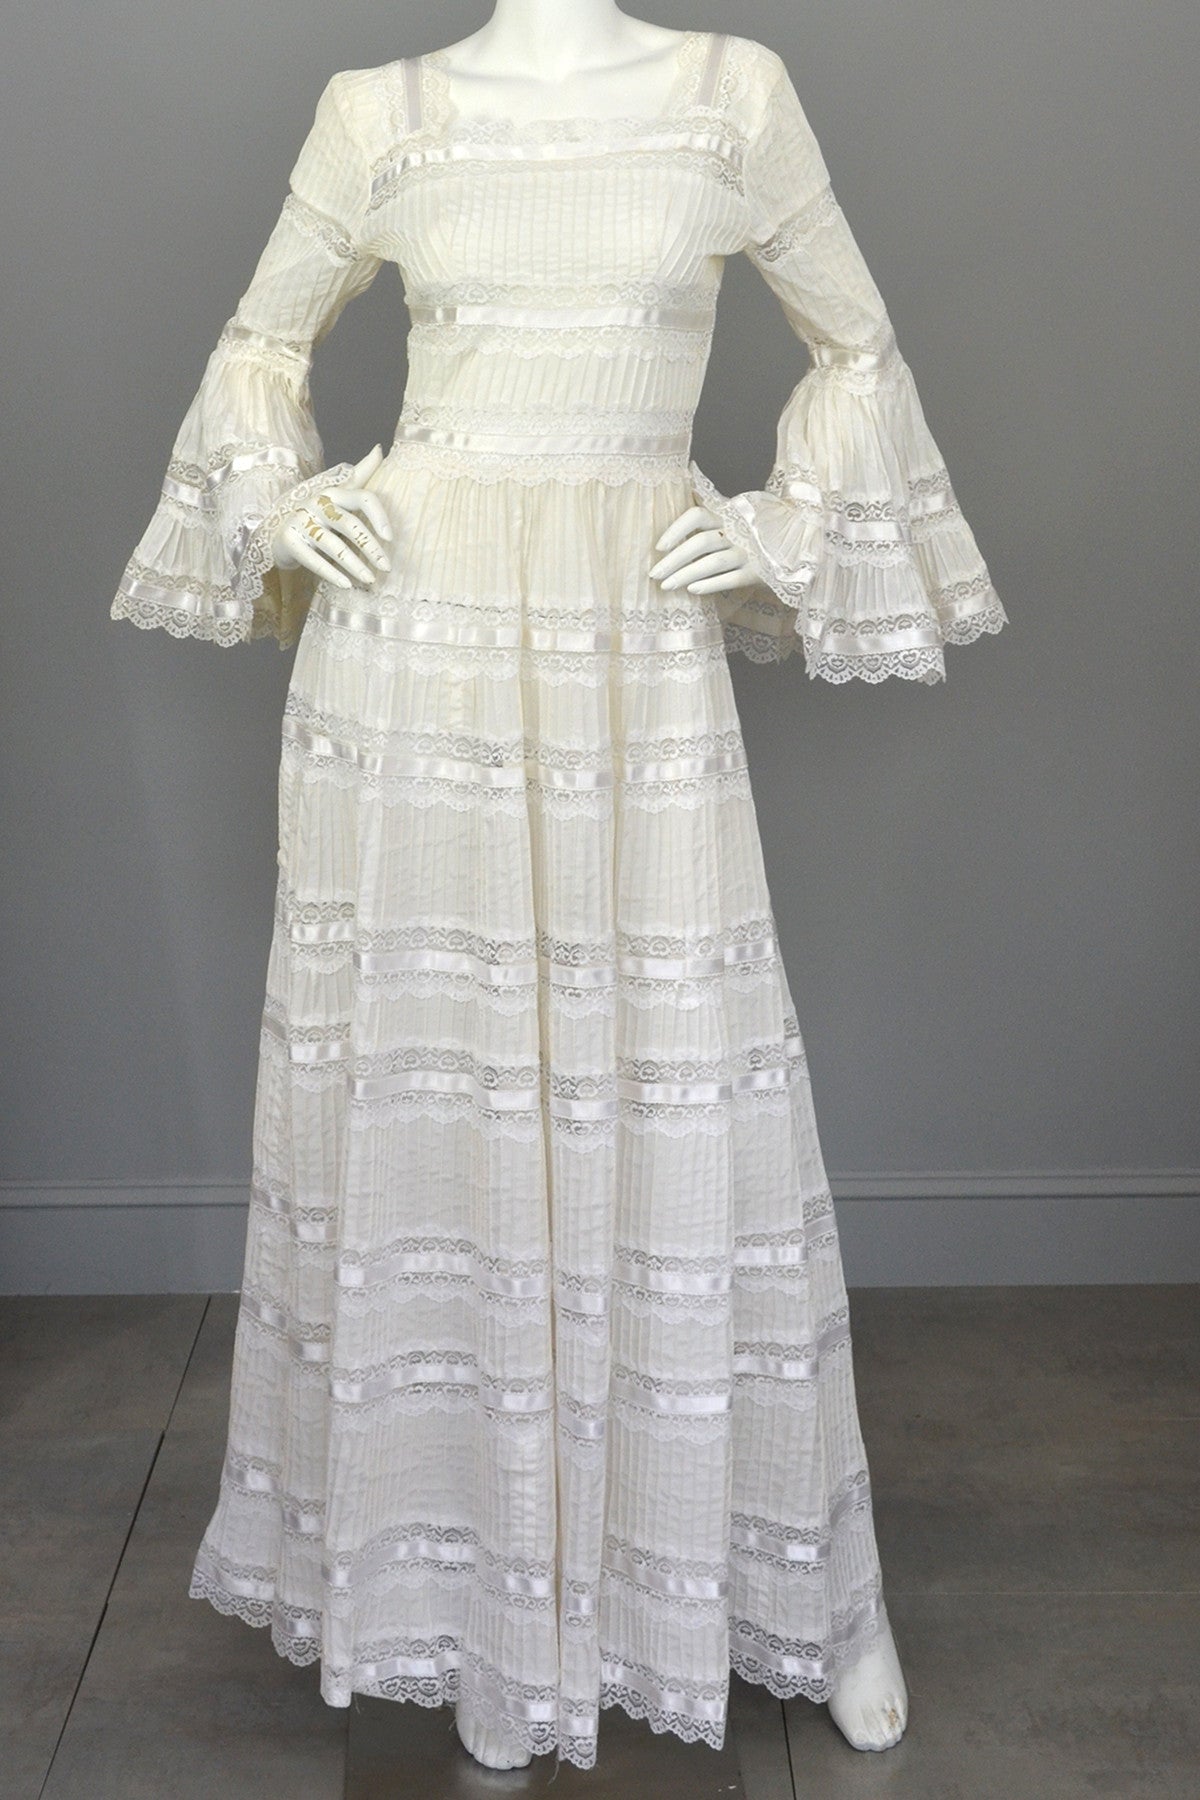 1970s Vintage Mexican Wedding Dress with Bell Sleeves and Lace